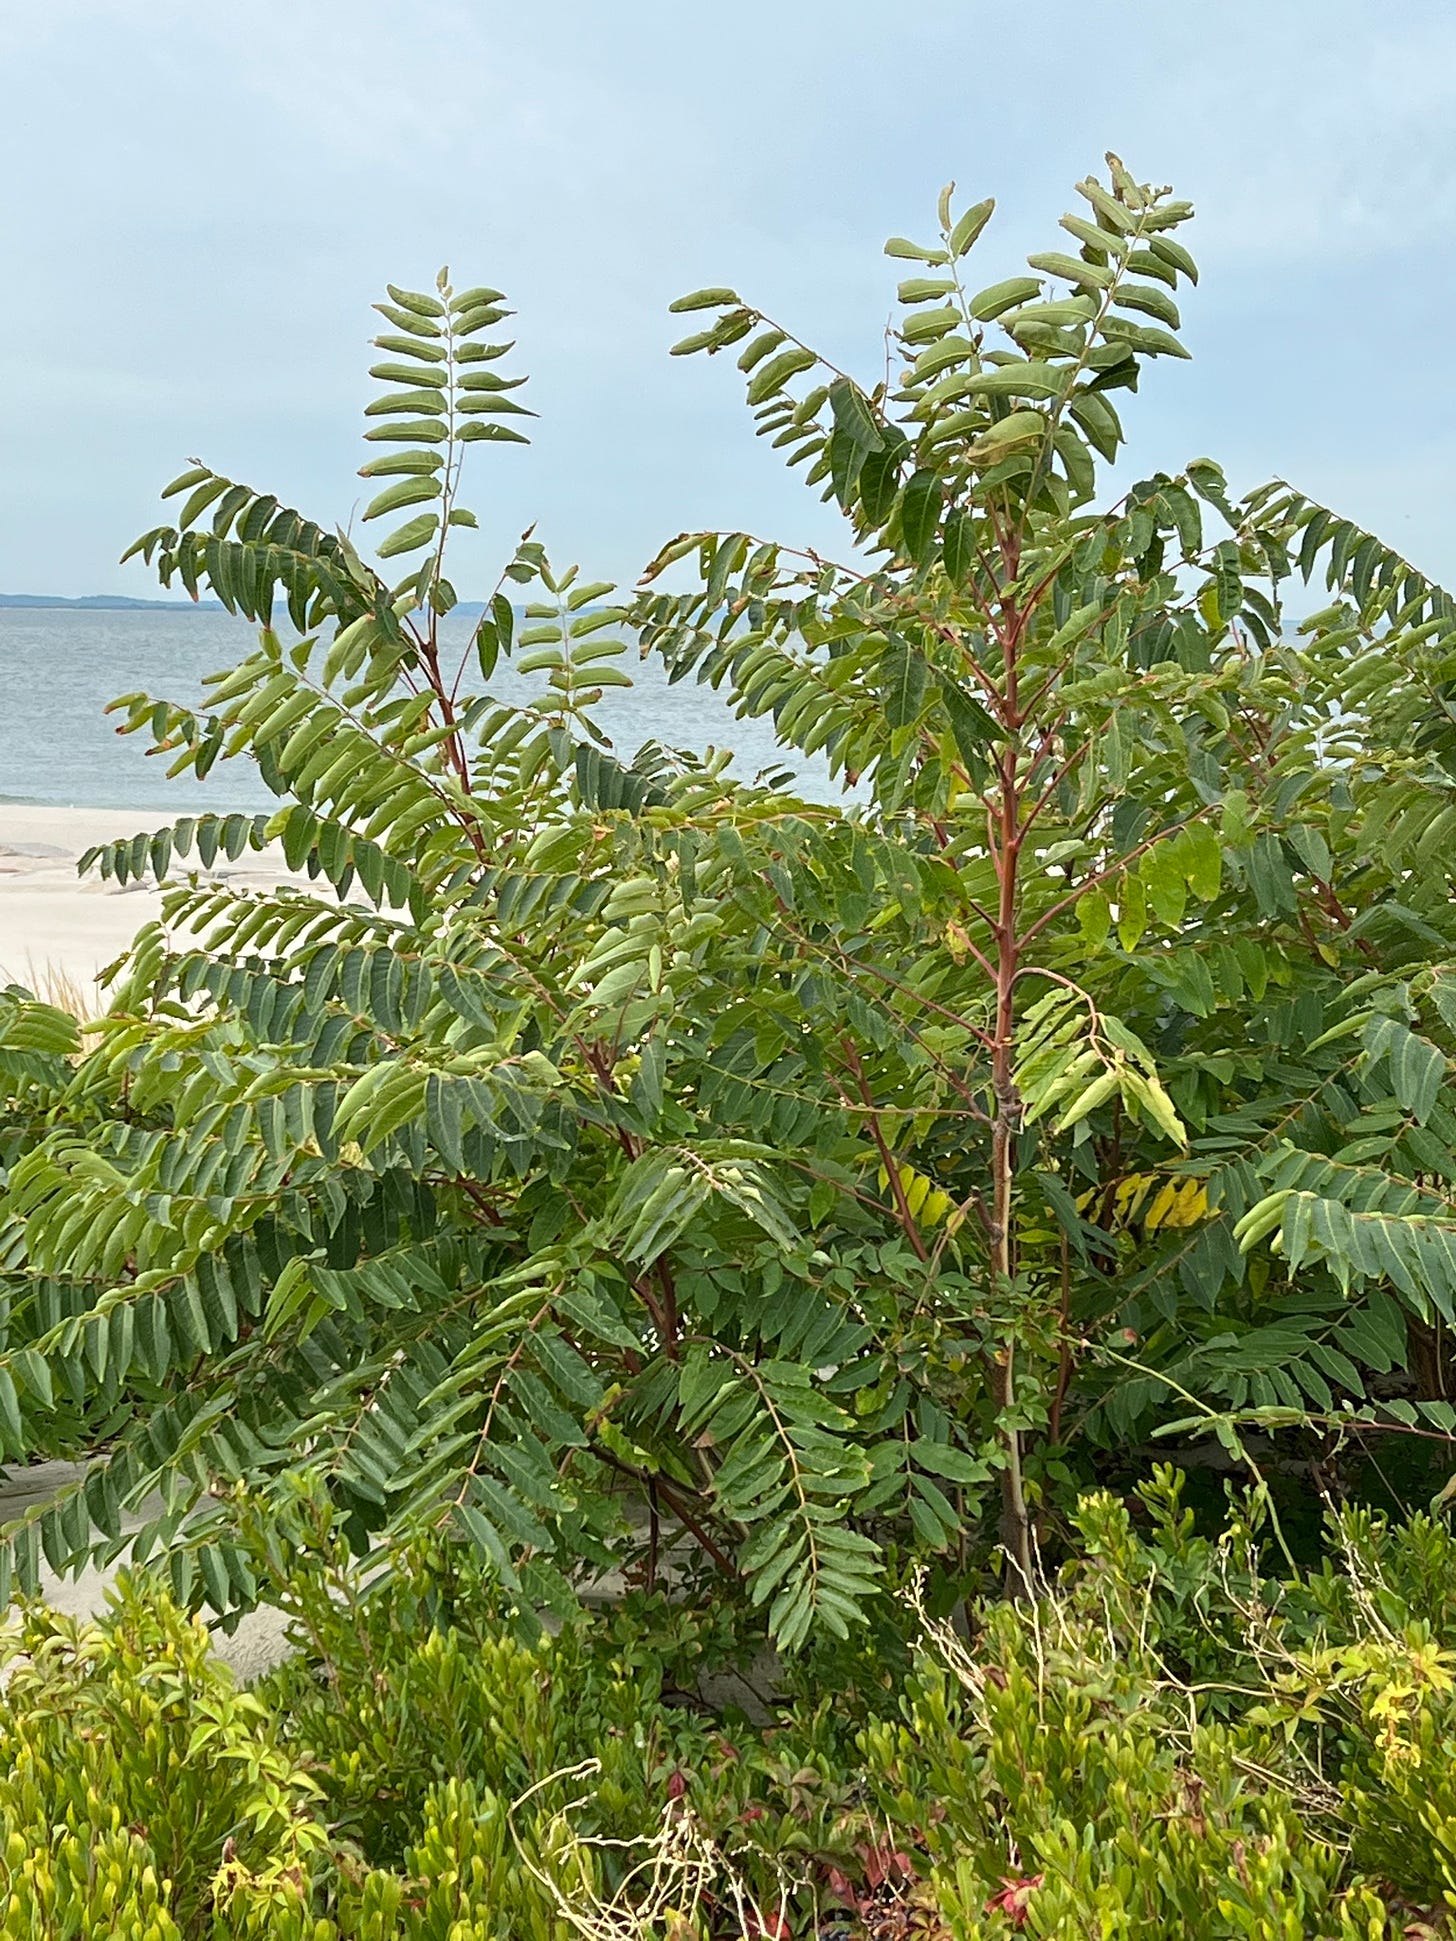 a mess of long fronds with opposite leaves coming out of red stems, set against a beachy background.